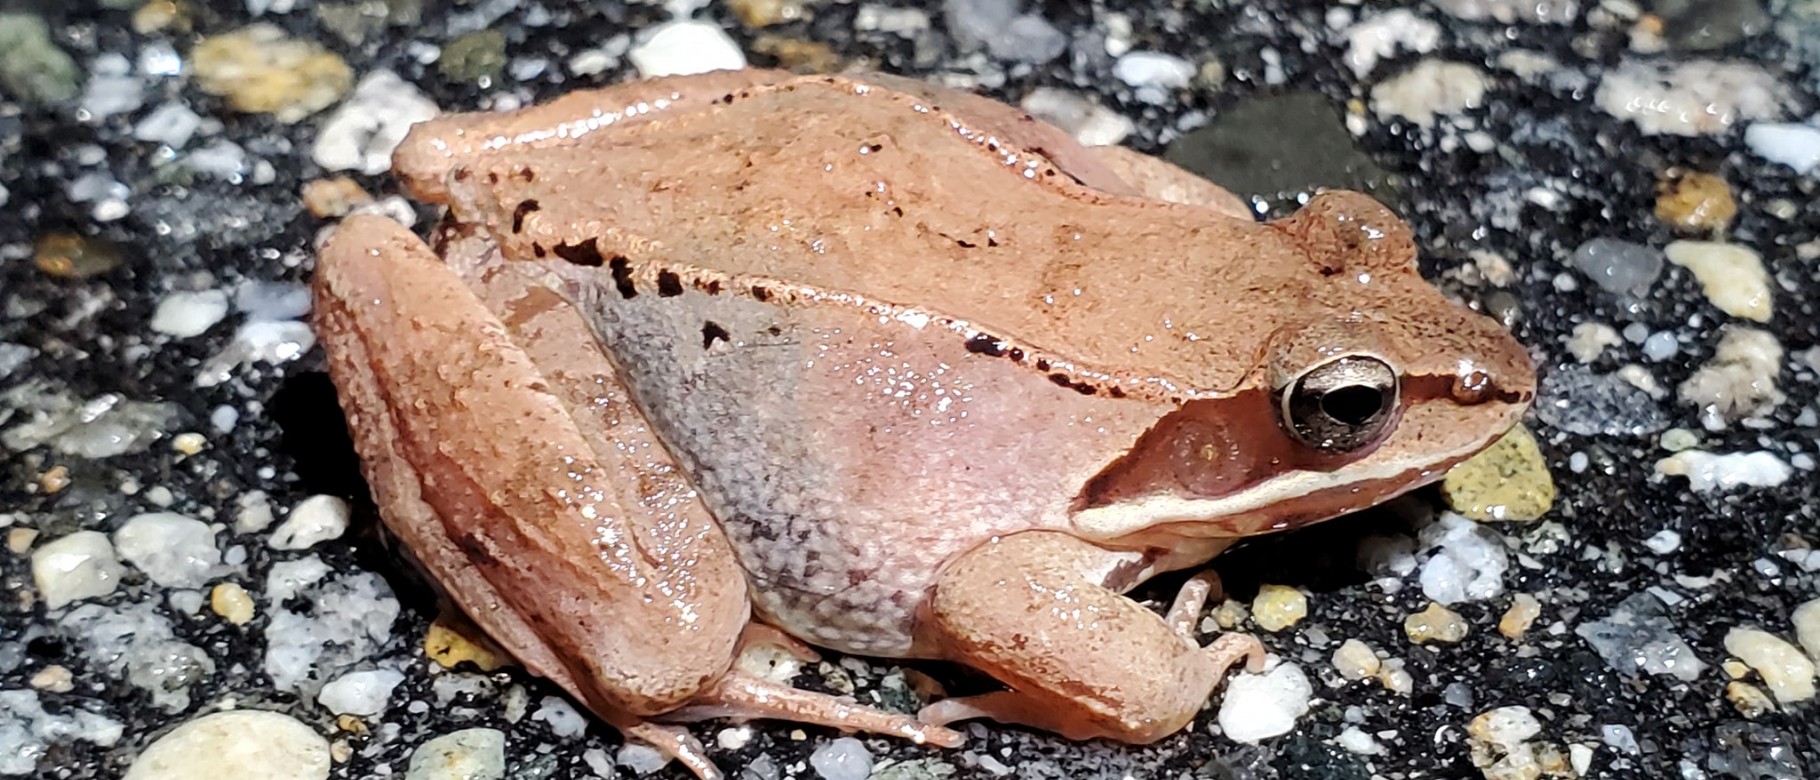 Frog on road